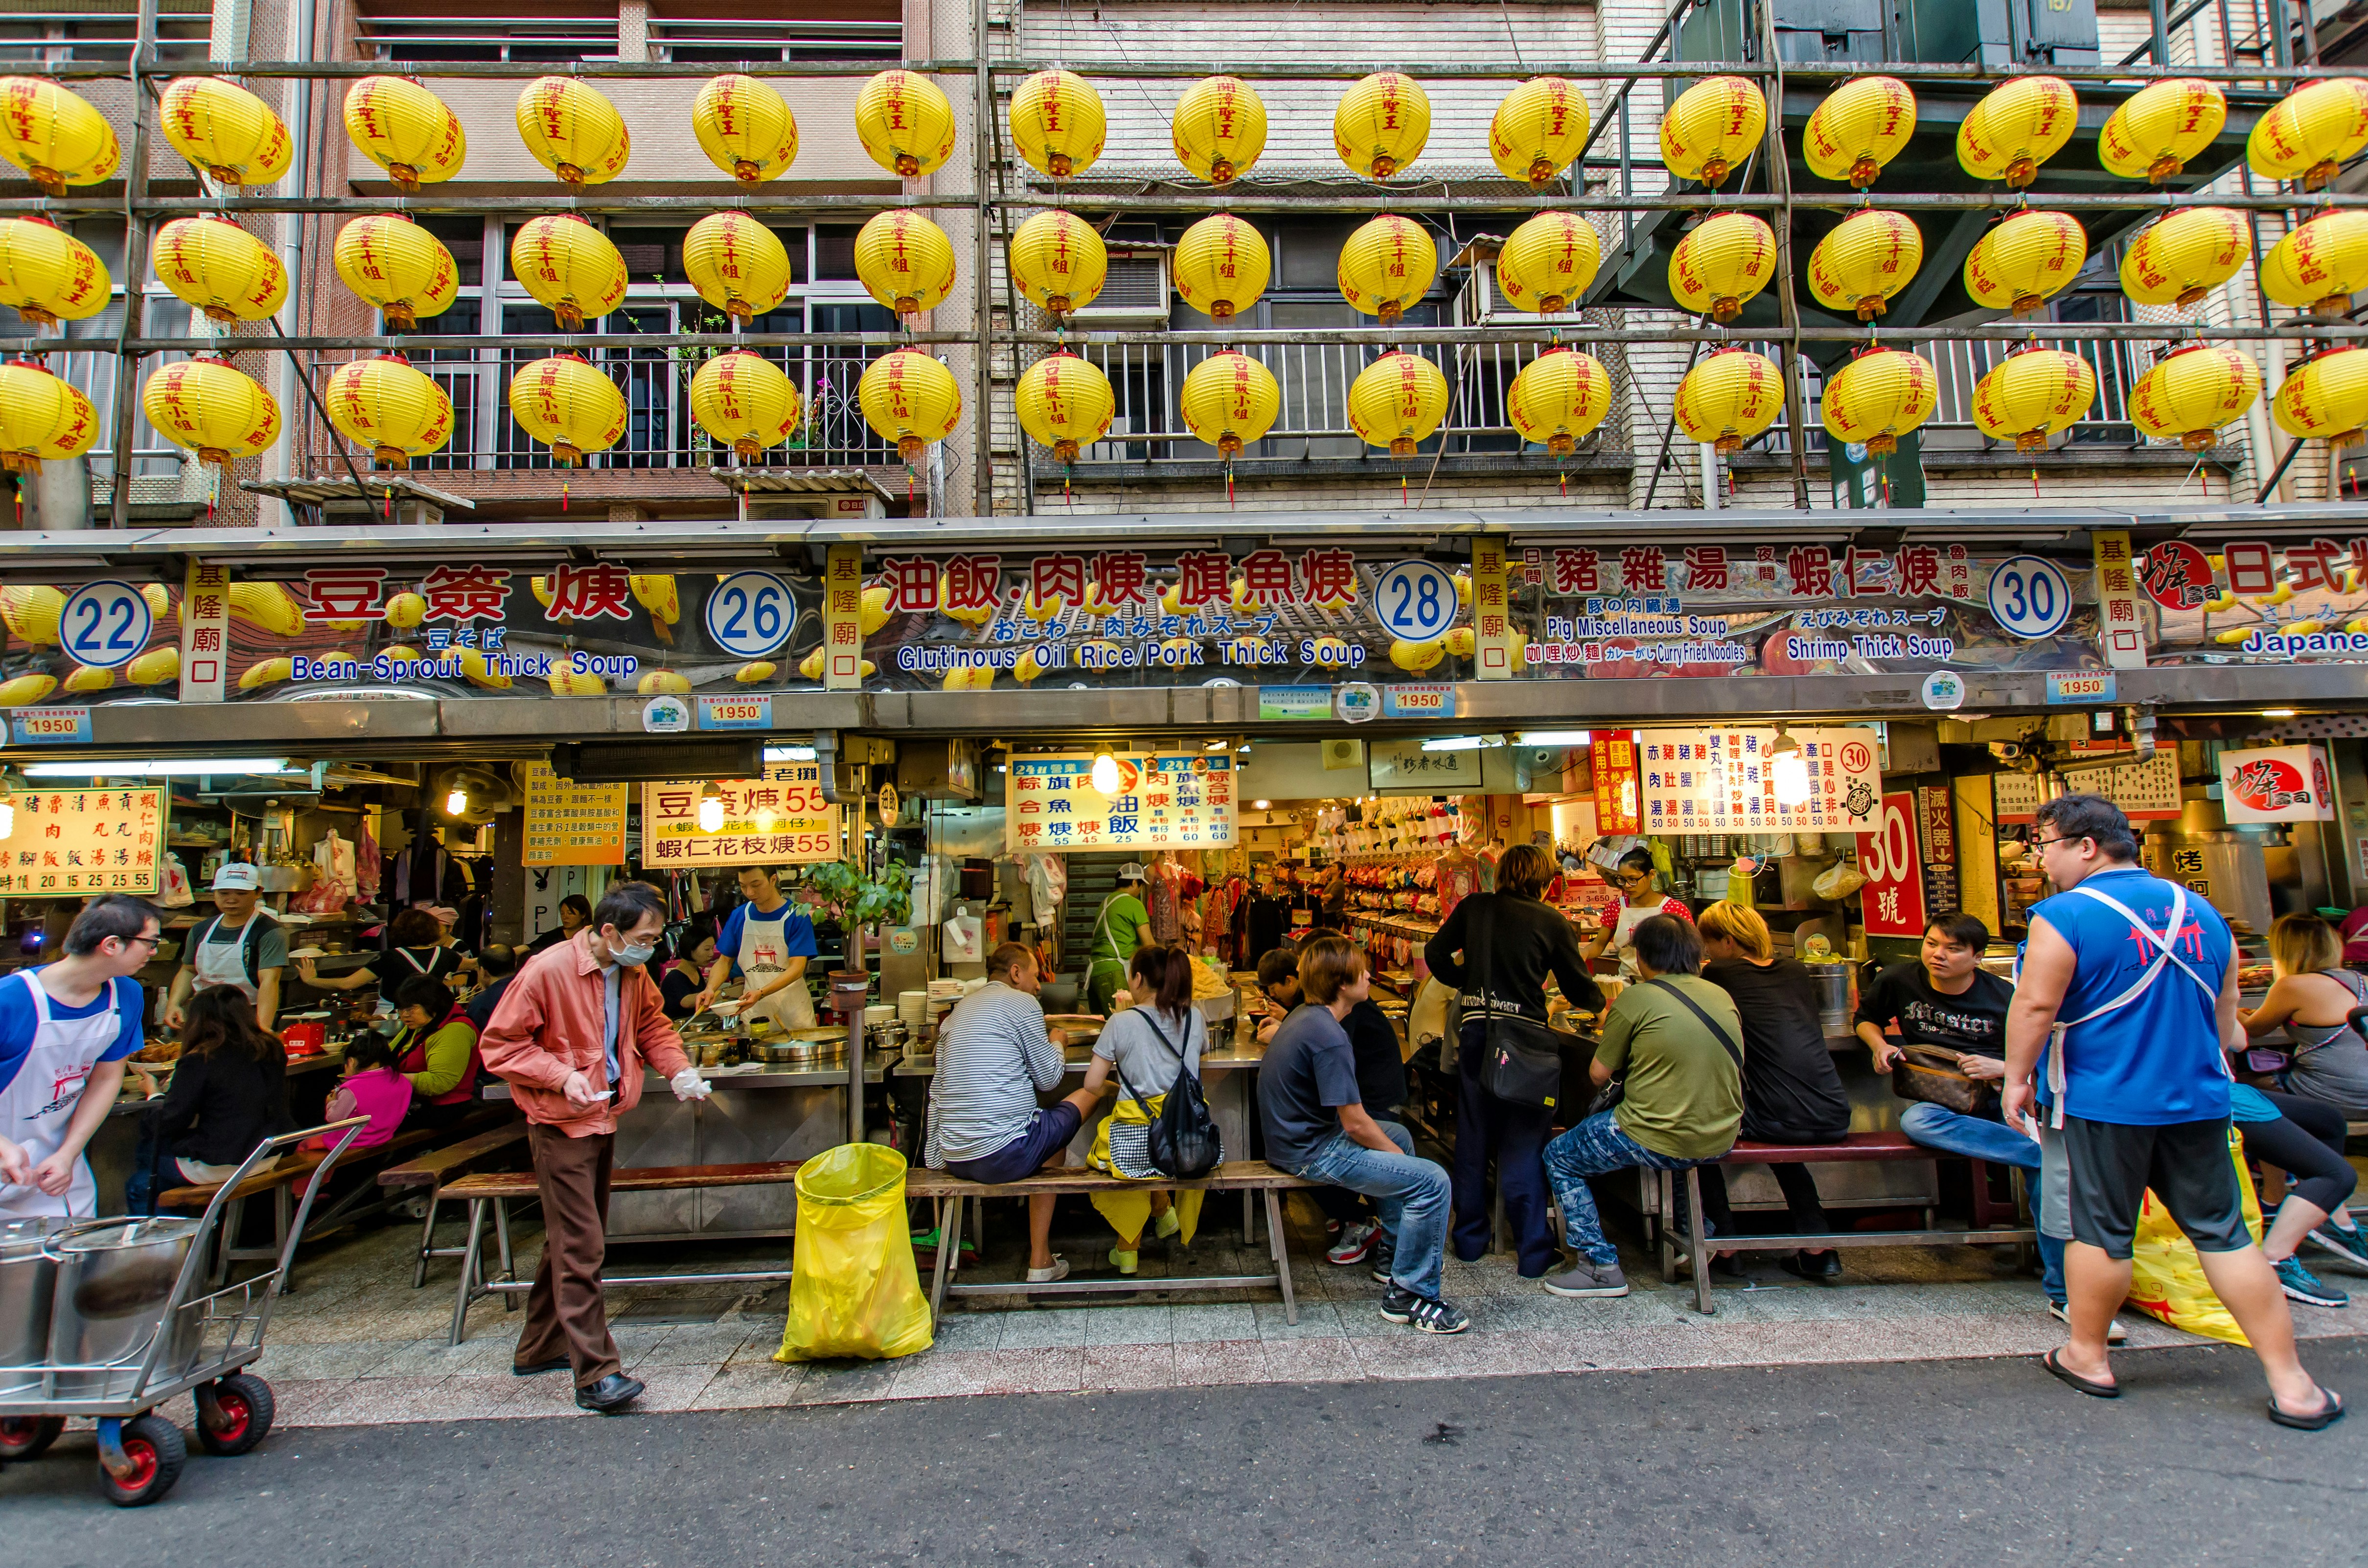 Diners sit at small tables in front of vendors cooking and selling food at a night market with yellow paper lanterns flying above them